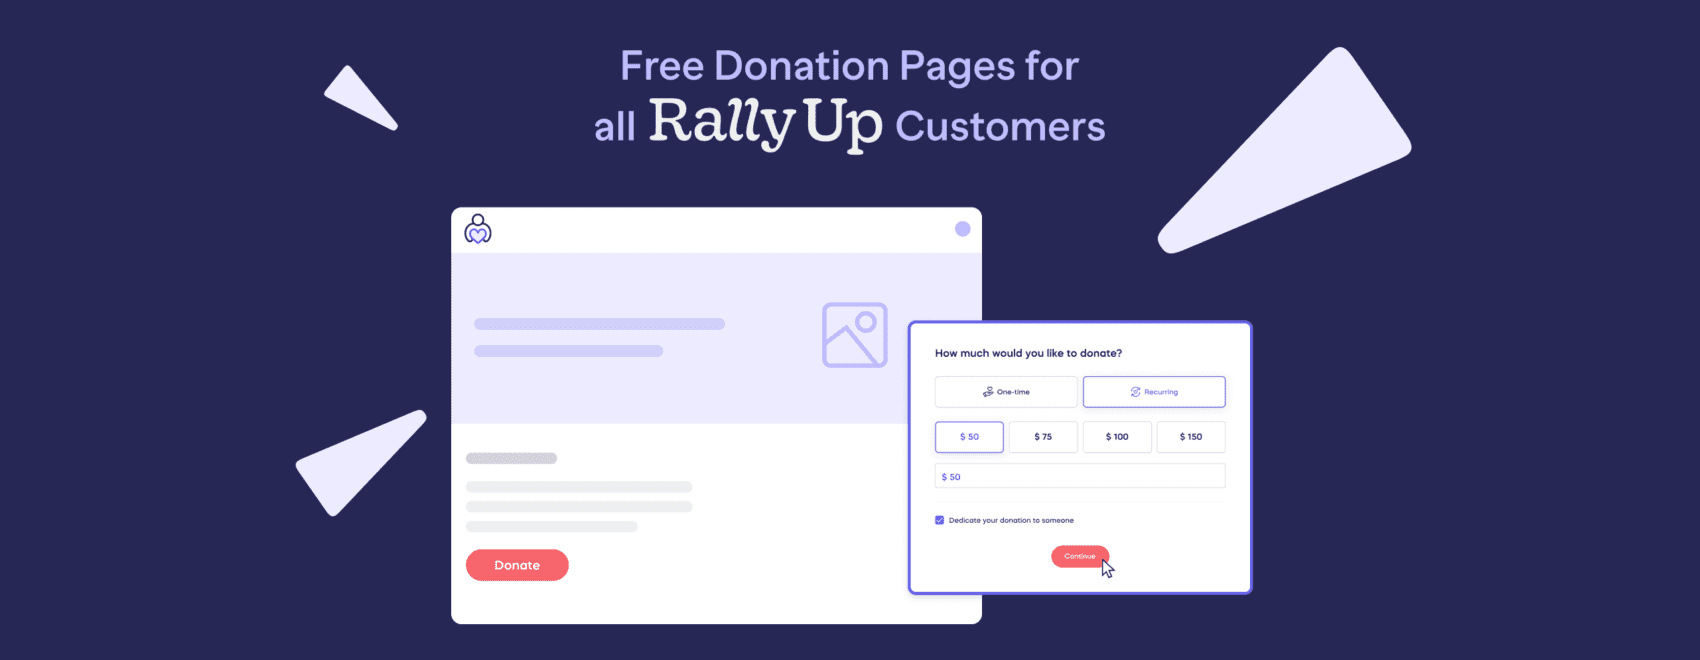 Free Donation Pages for all RallyUp customers